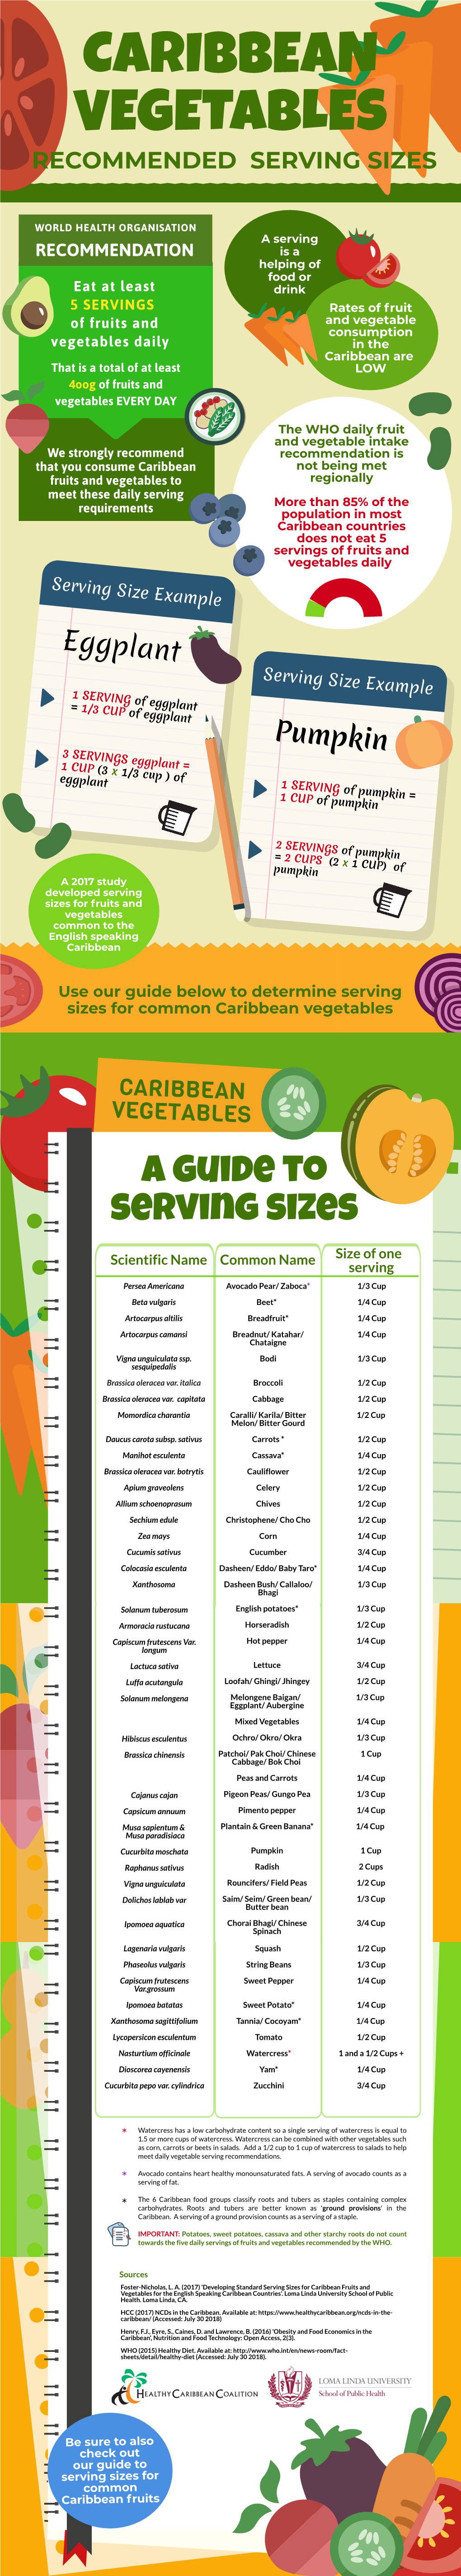 Caribbean Fruits and Vegetables for the English Speaking Caribbean Countries'